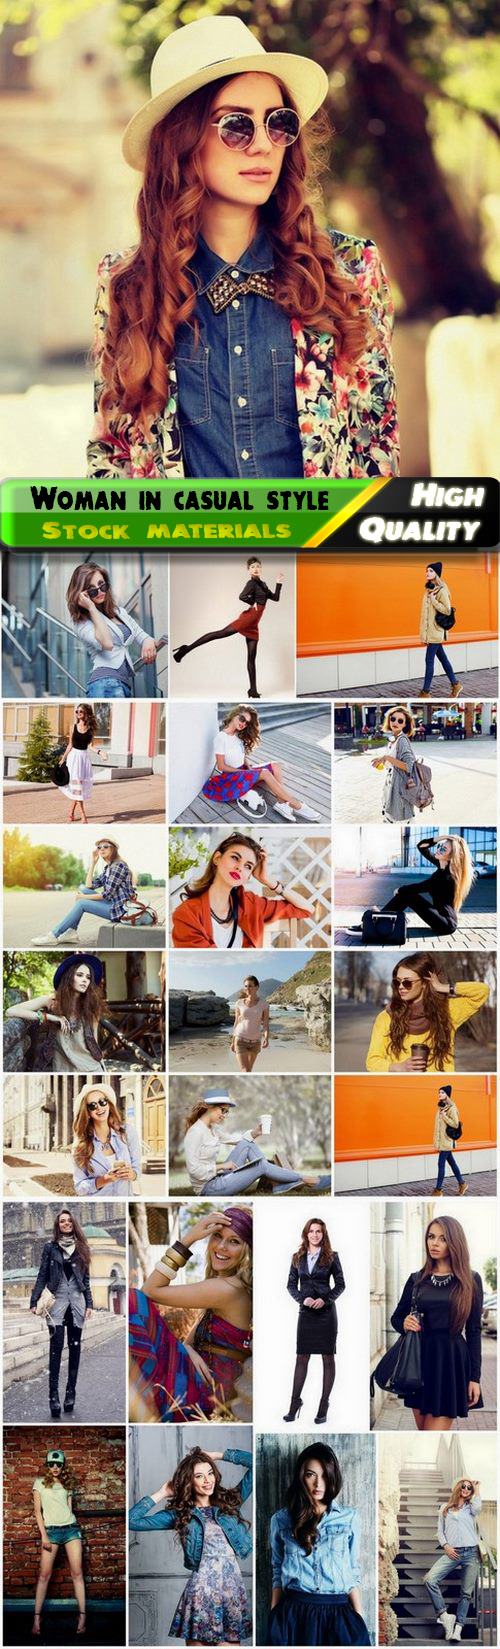 Stylish and fashionable woman in casual style - 25 HQ Jpg